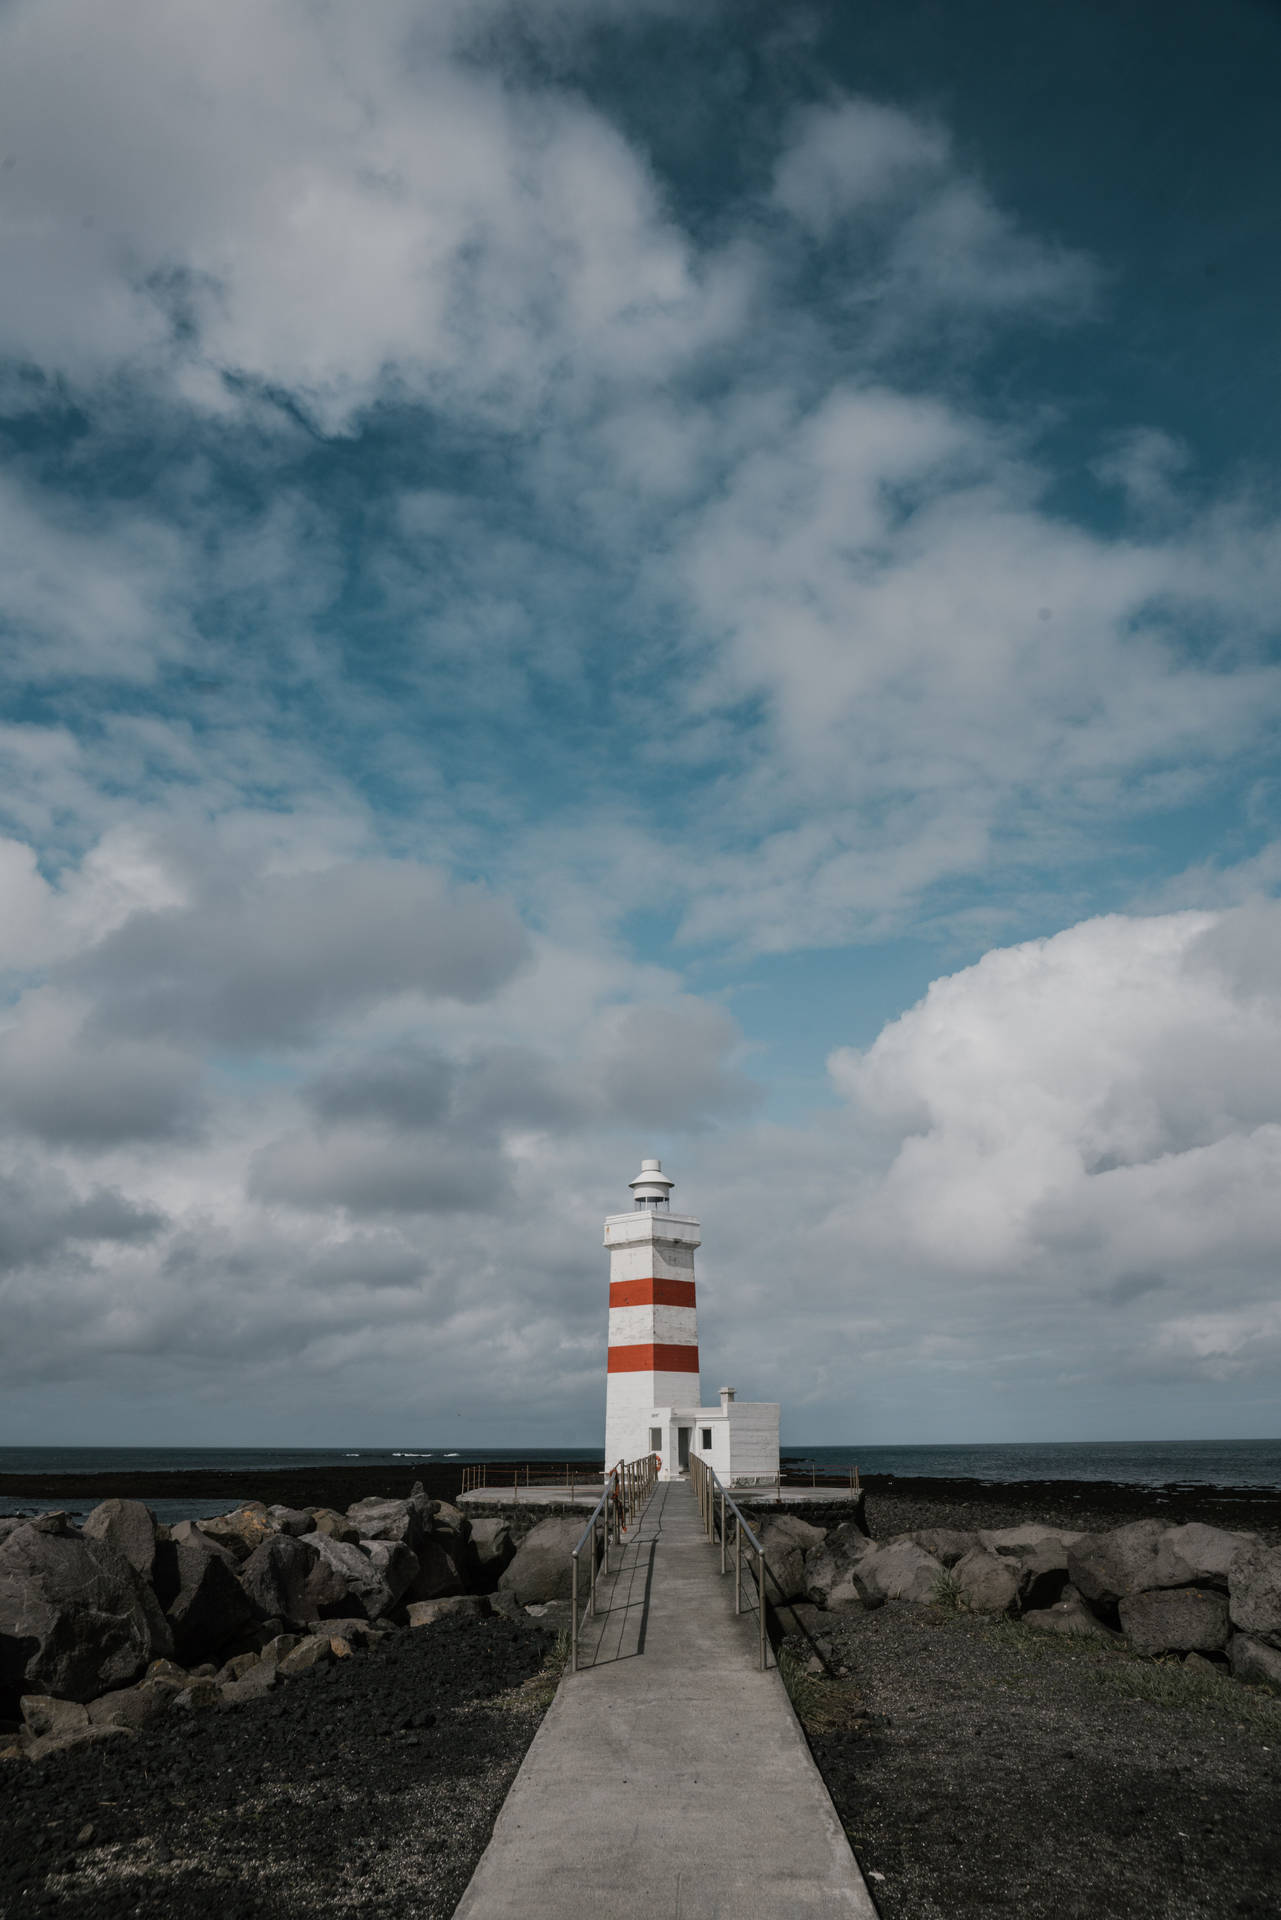 Majestic Lighthouse Under Gray Cloudy Skies Wallpaper